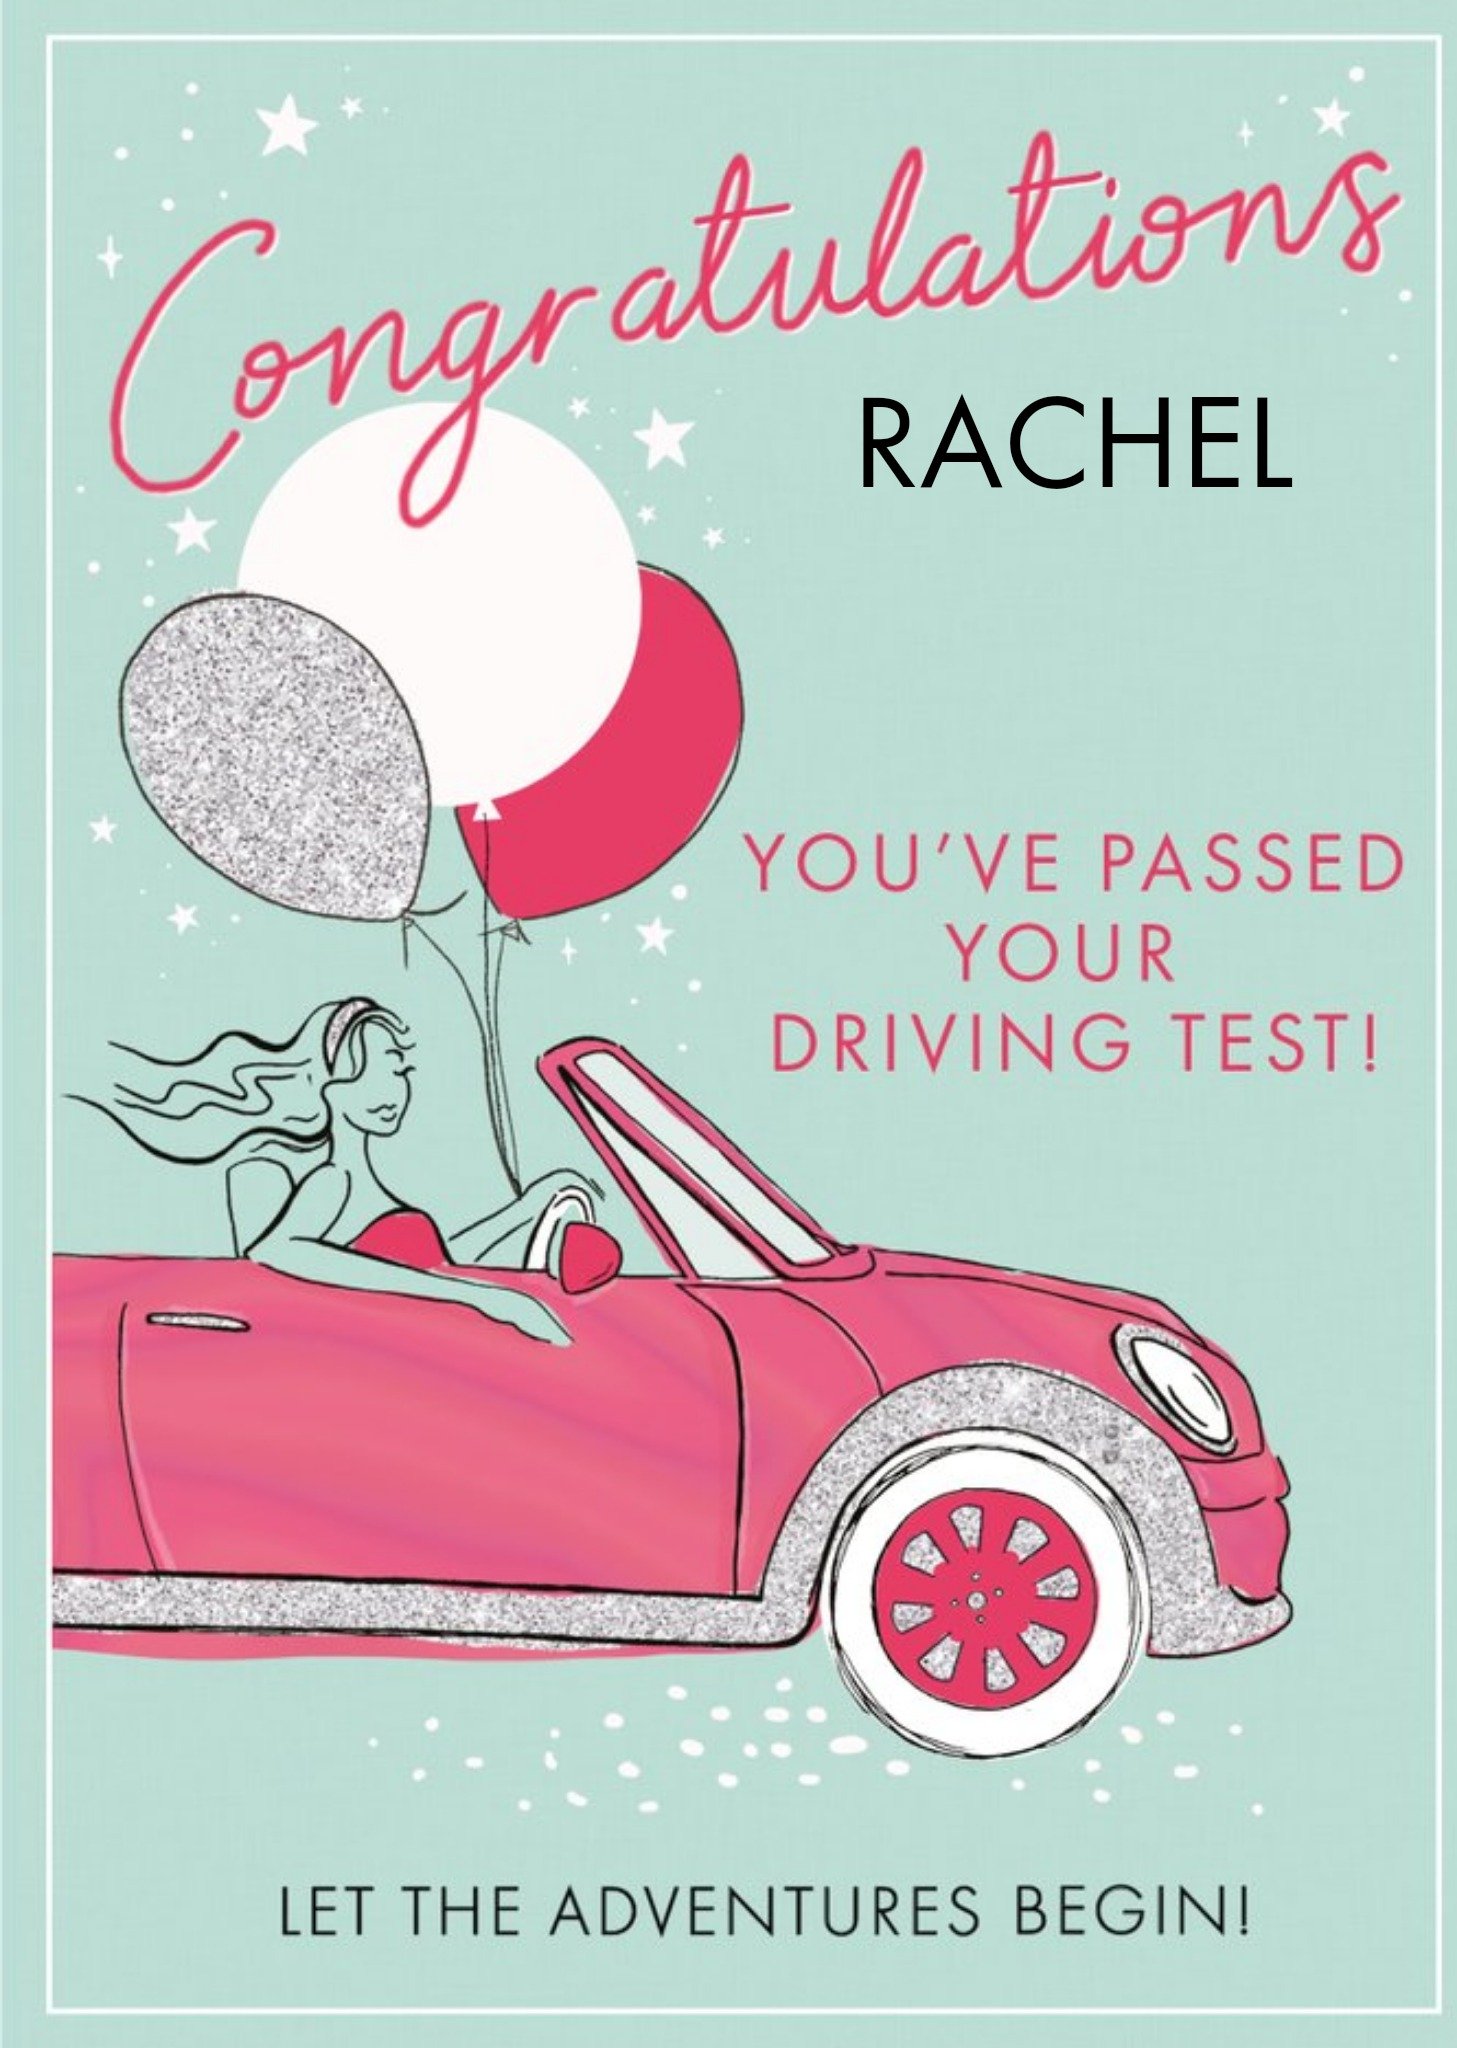 Moonpig Clintons You've Passed Your Driving Test Congratulations Card Ecard